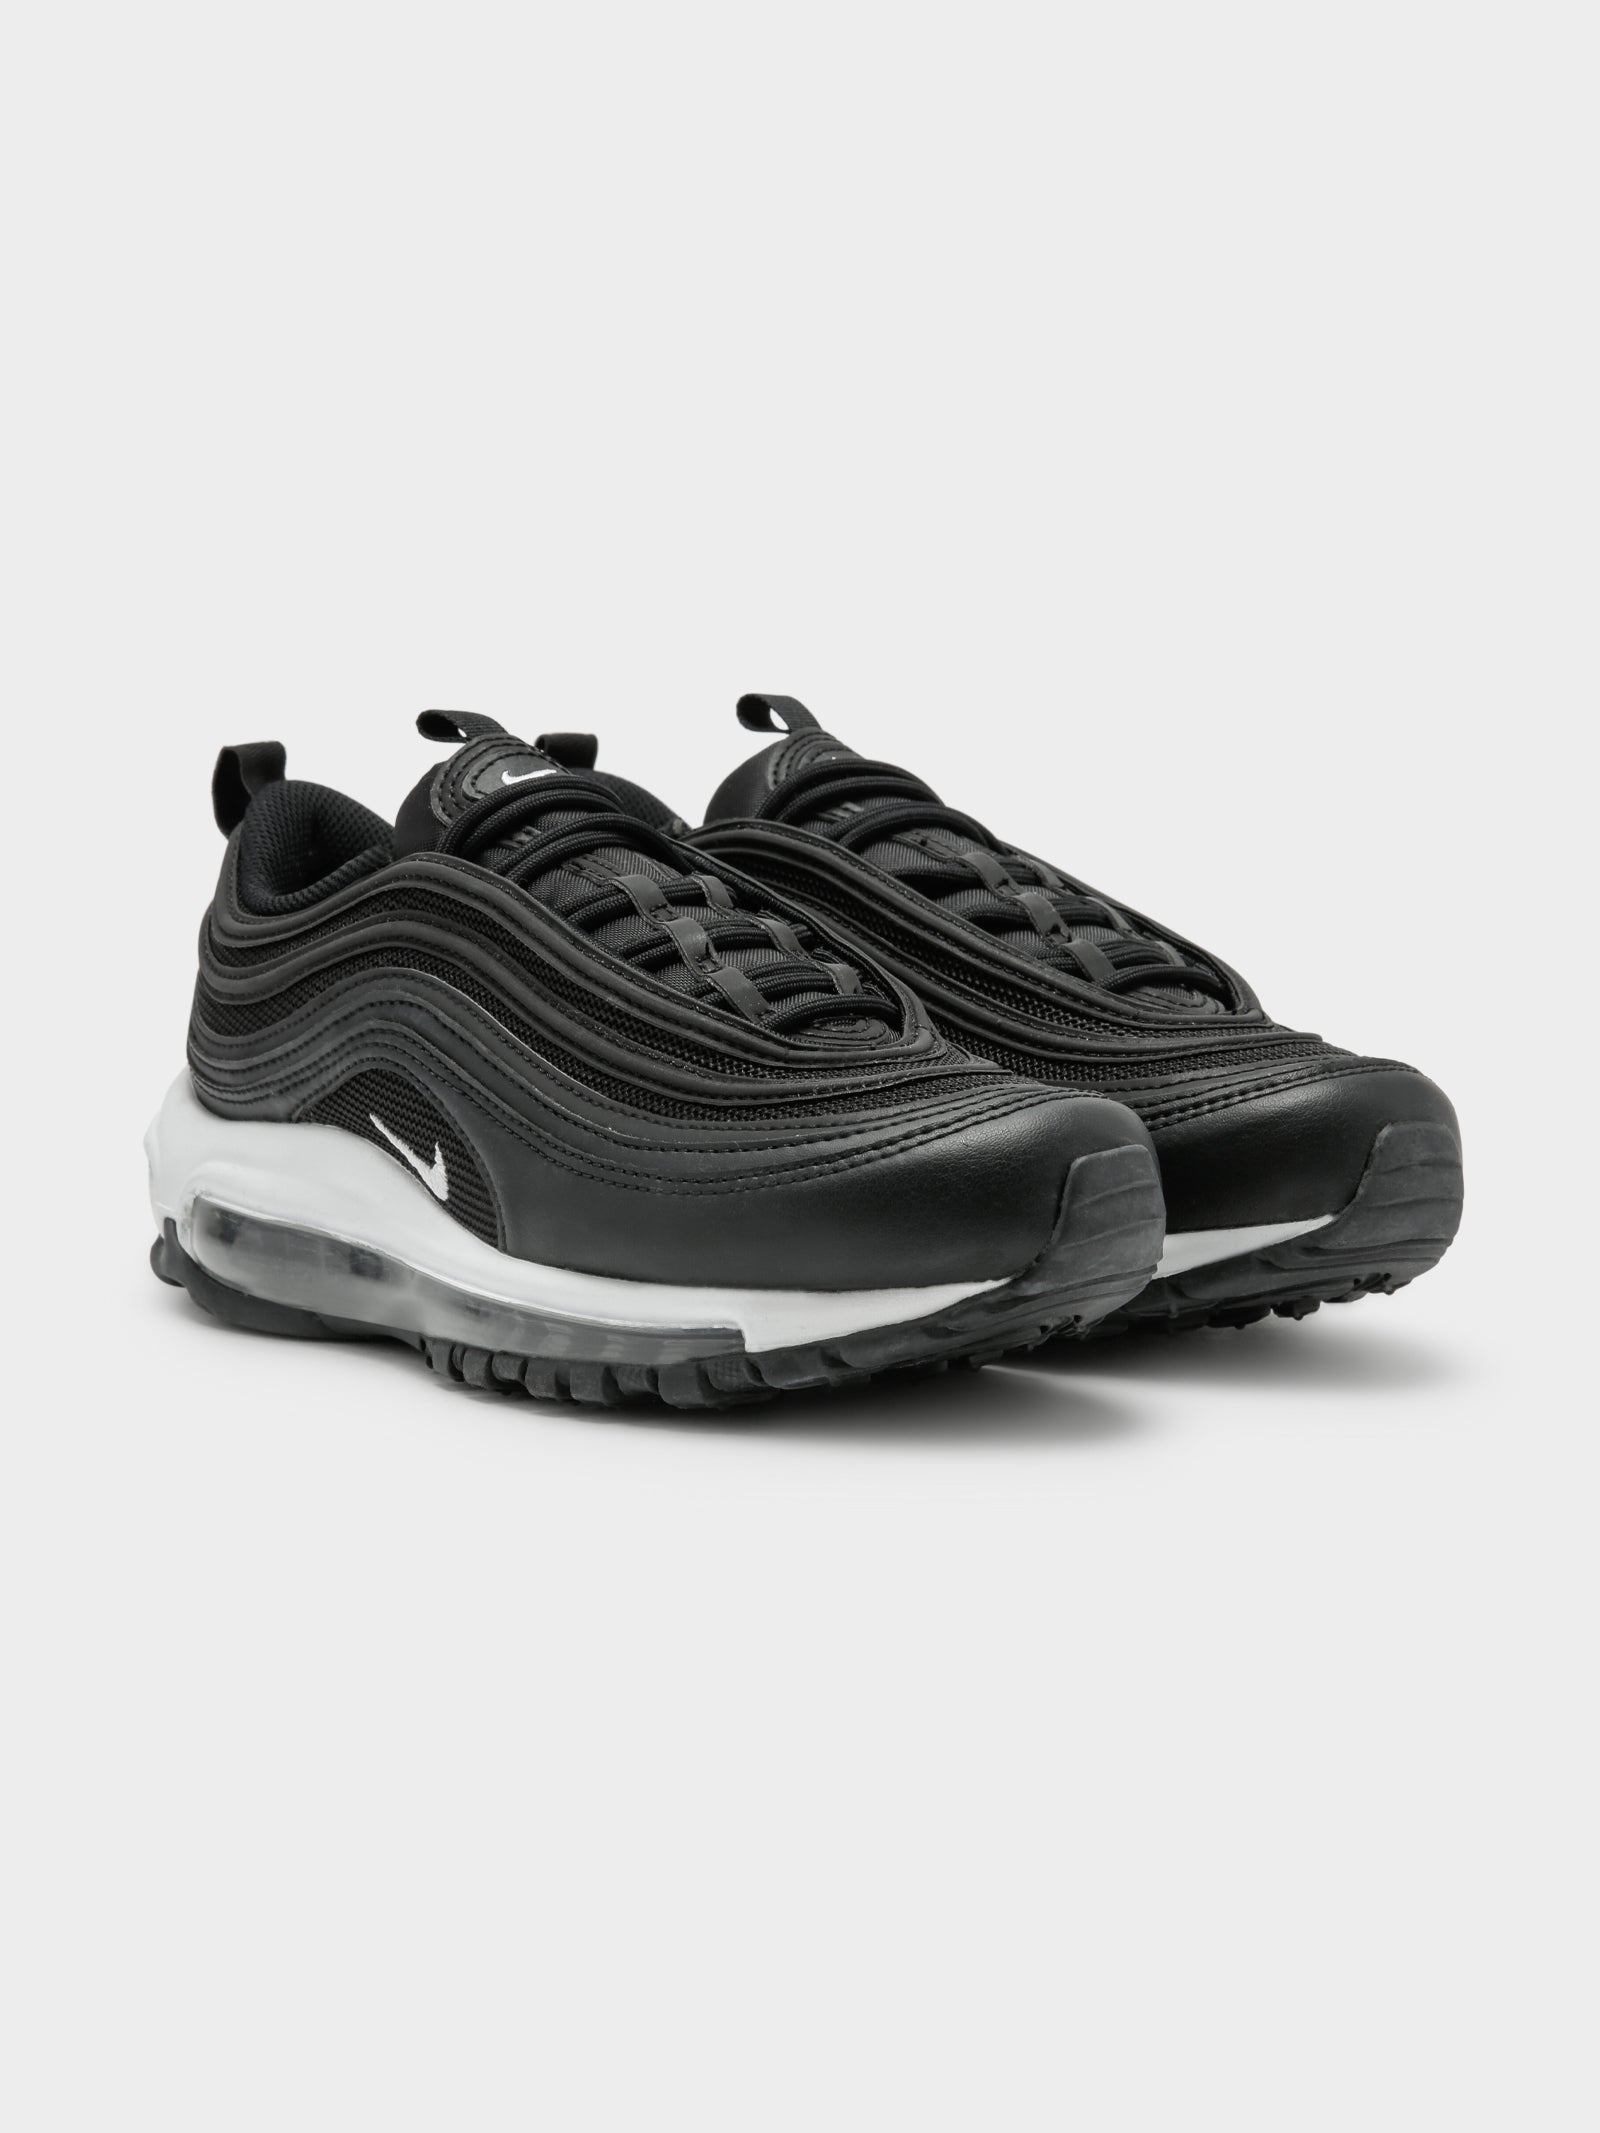 Womens Air Max 97 Sneakers in Black & White